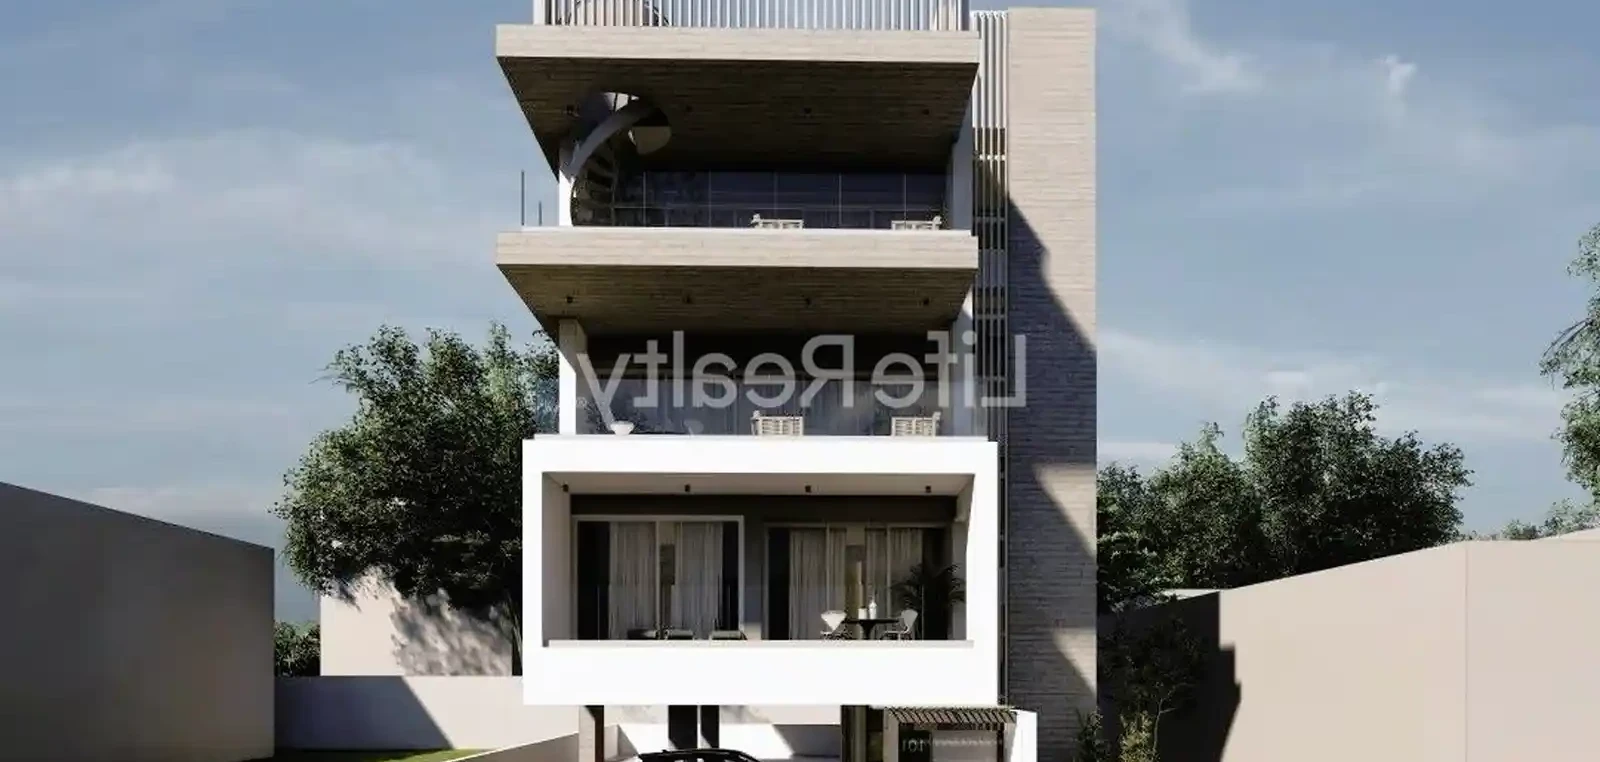 1-bedroom apartment fоr sаle €238.900, image 1